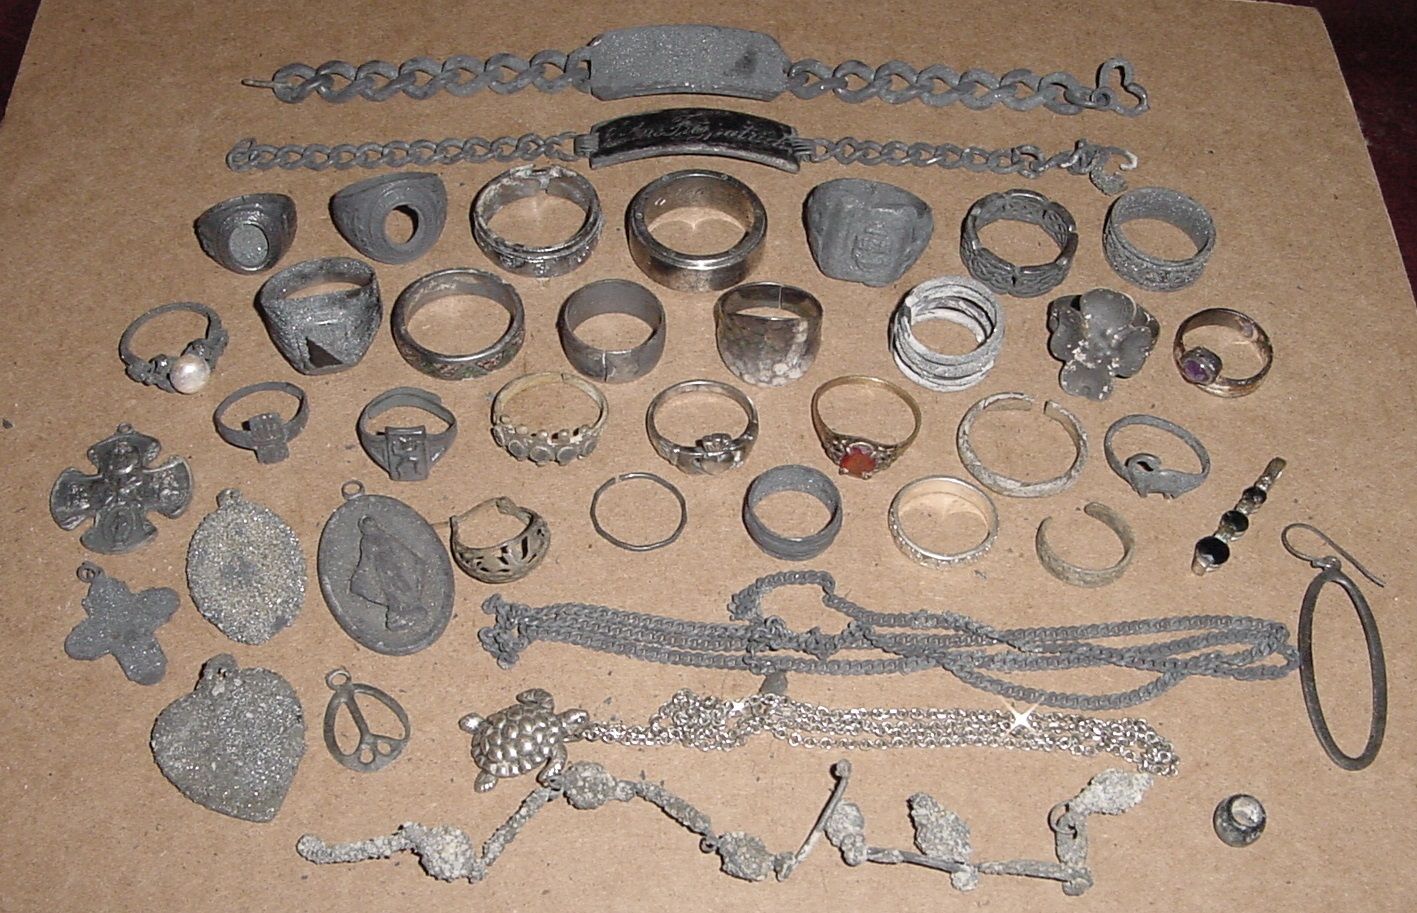 MOST OF MY SILVER JEWELRY FOR 2015 - (SOME IS MISSING BECAUSE IT IS GOING INTO A MUSEUM DISPLAY)